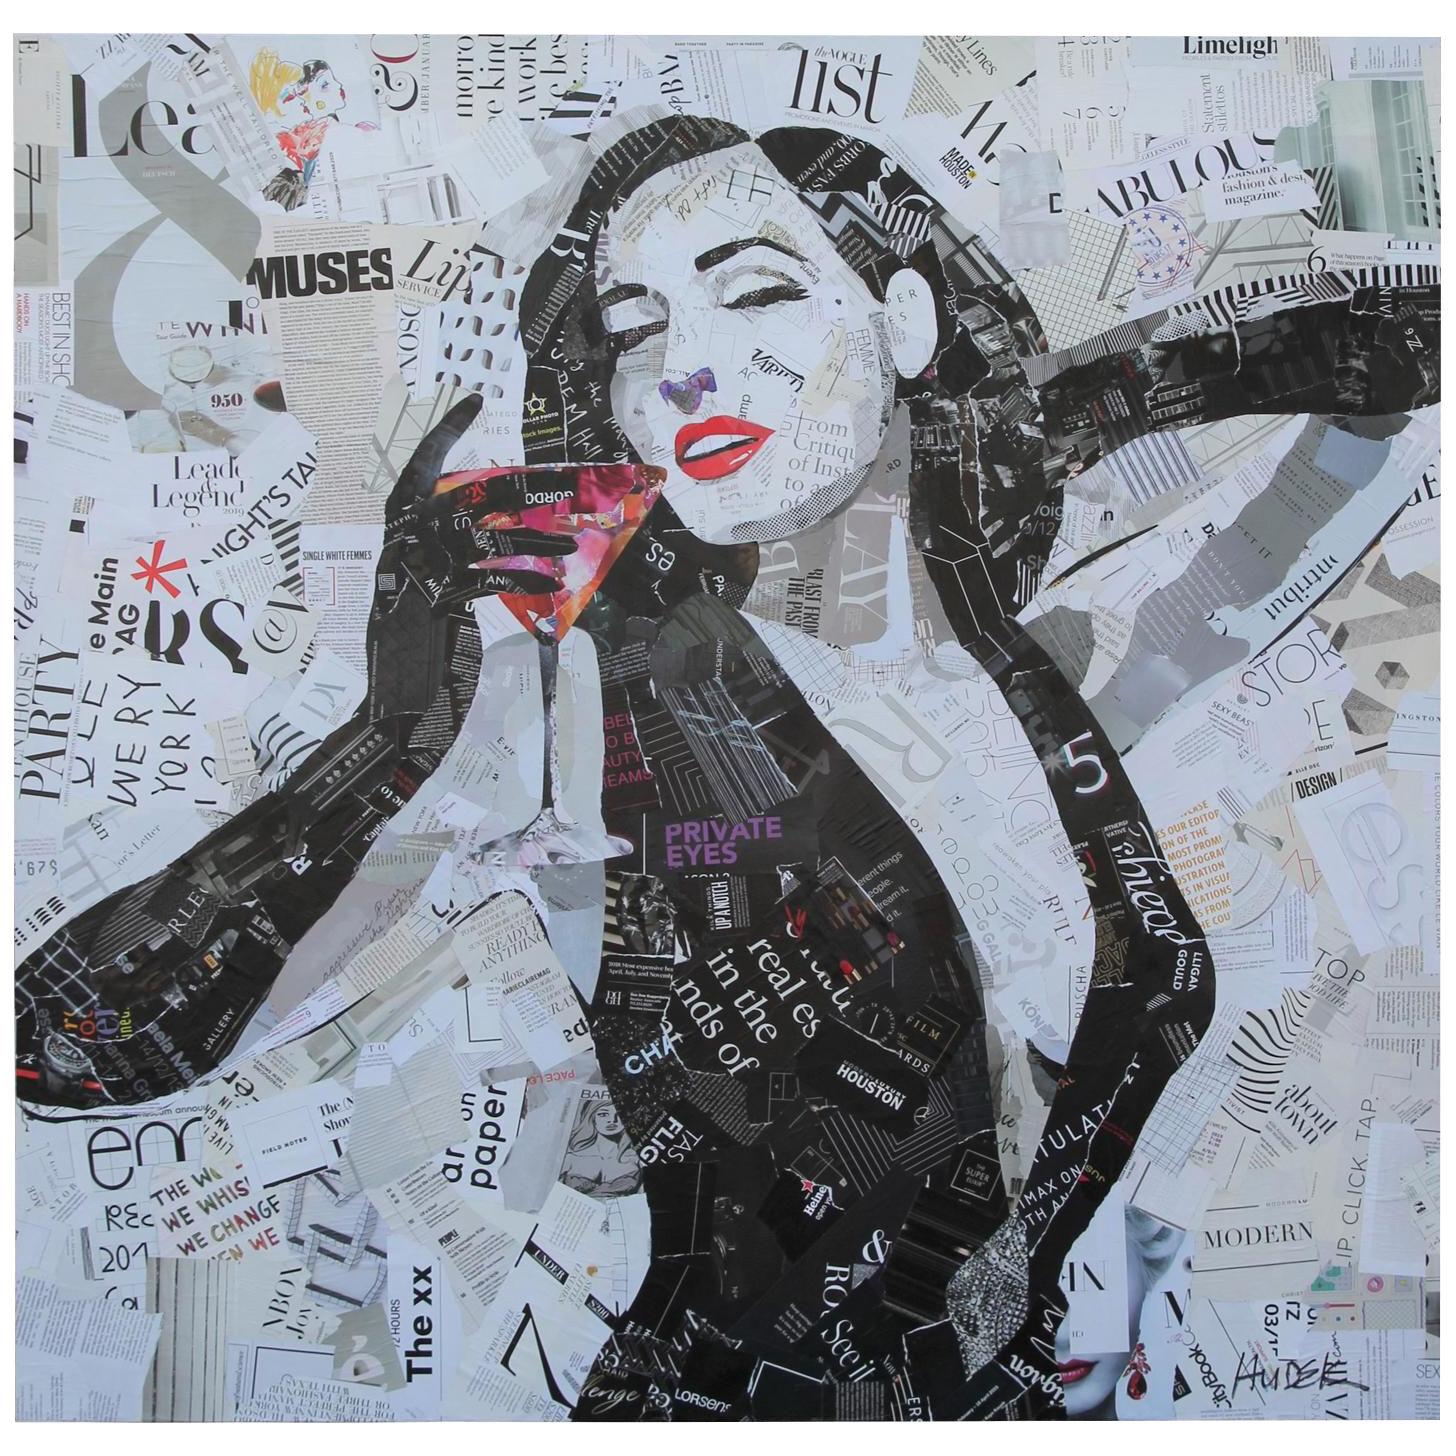 Dita Von Teese Mixed Media Collage Portrait of Burlesque Dancer Early 21st C